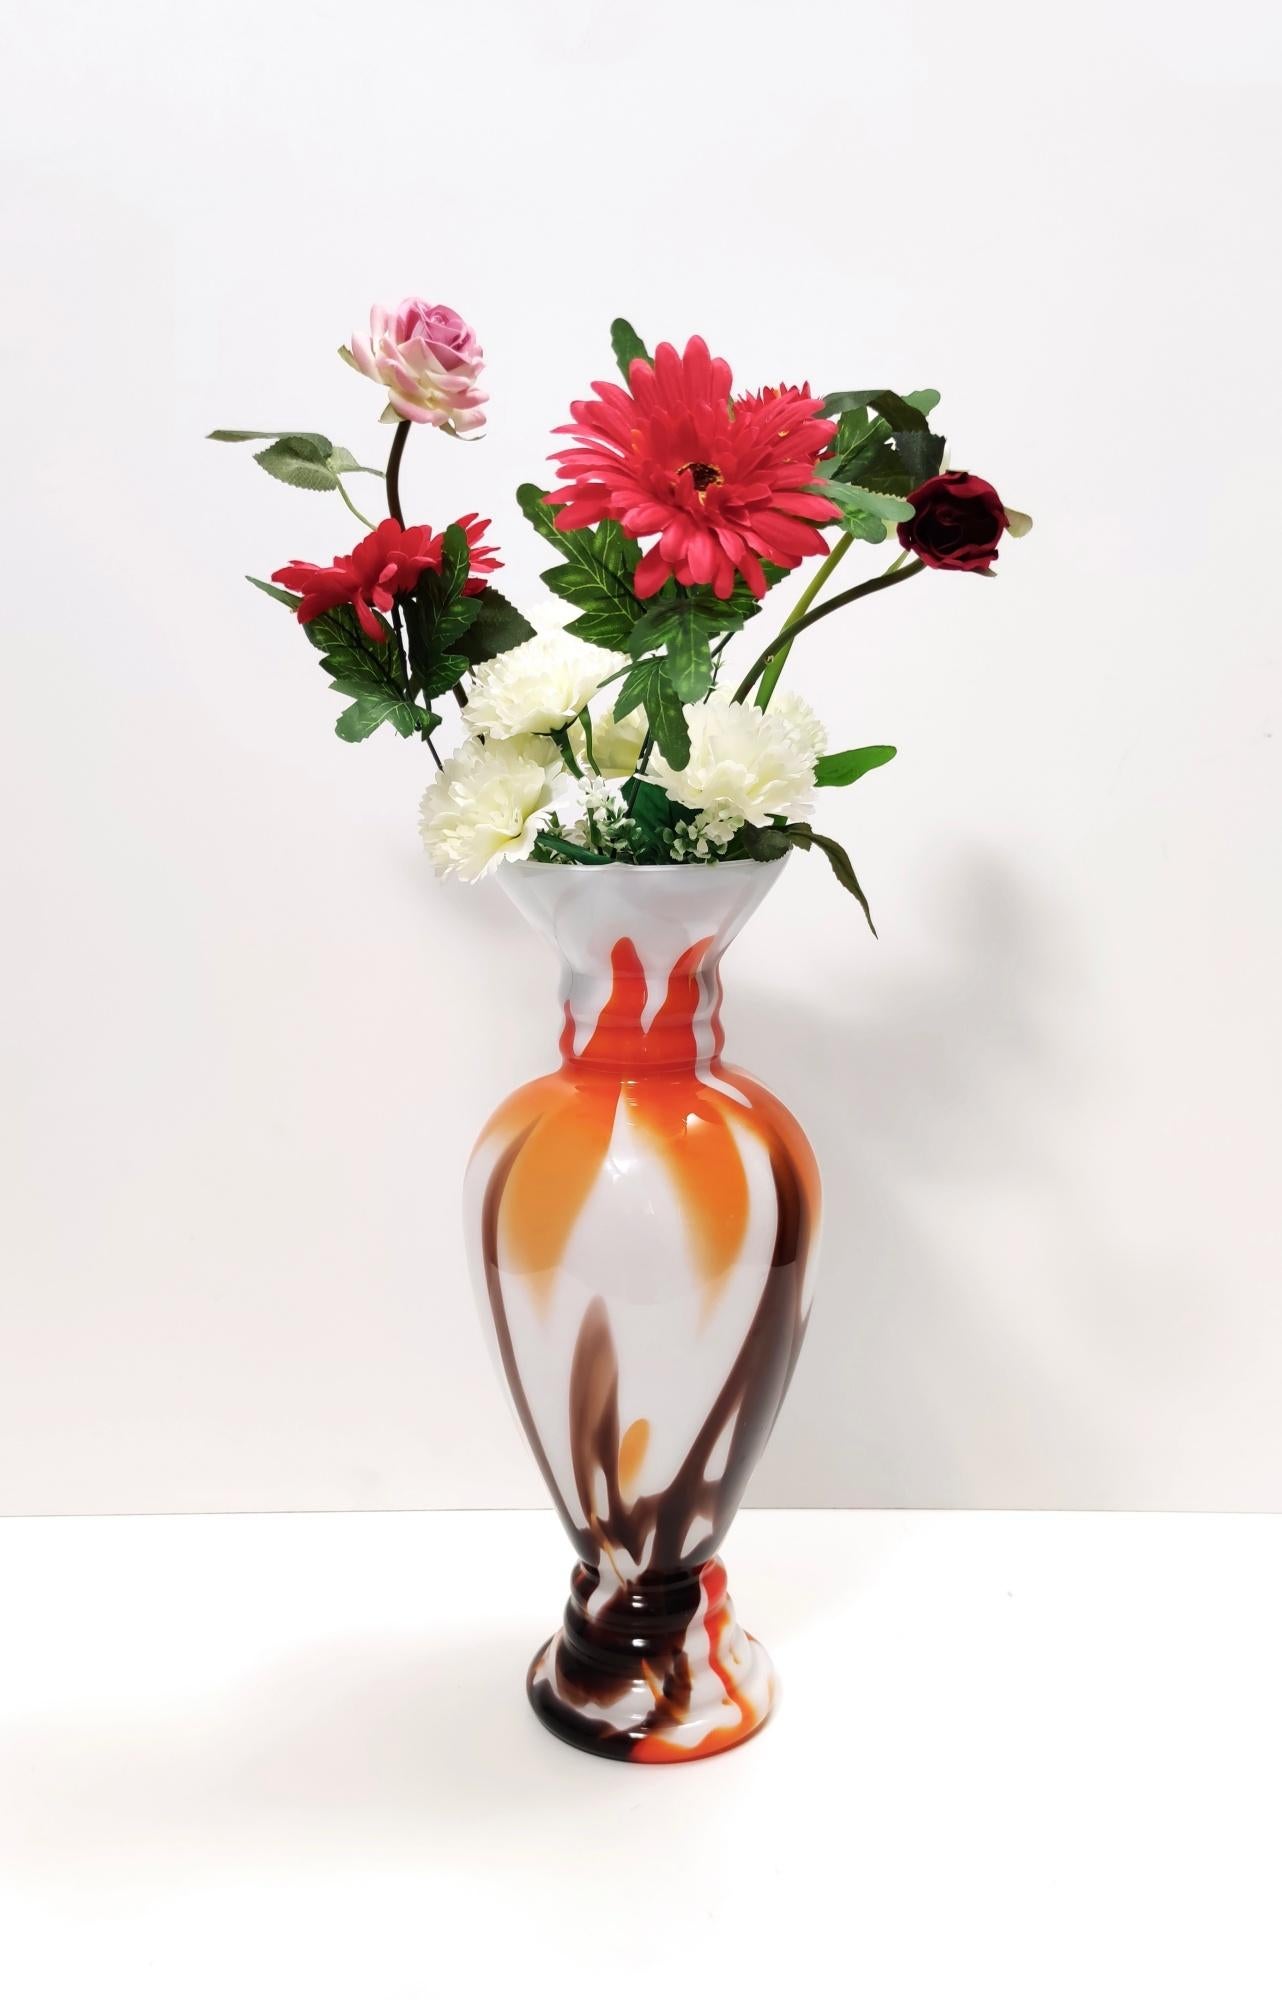 Made in Italy, 1970s. 
This vase is made in Murano glass.
It might show slight traces of use since it's vintage, but it can be considered as in perfect original condition and ready to become a piece in a home. 

Measures: 
Diameter 17 cm
Height 43.5